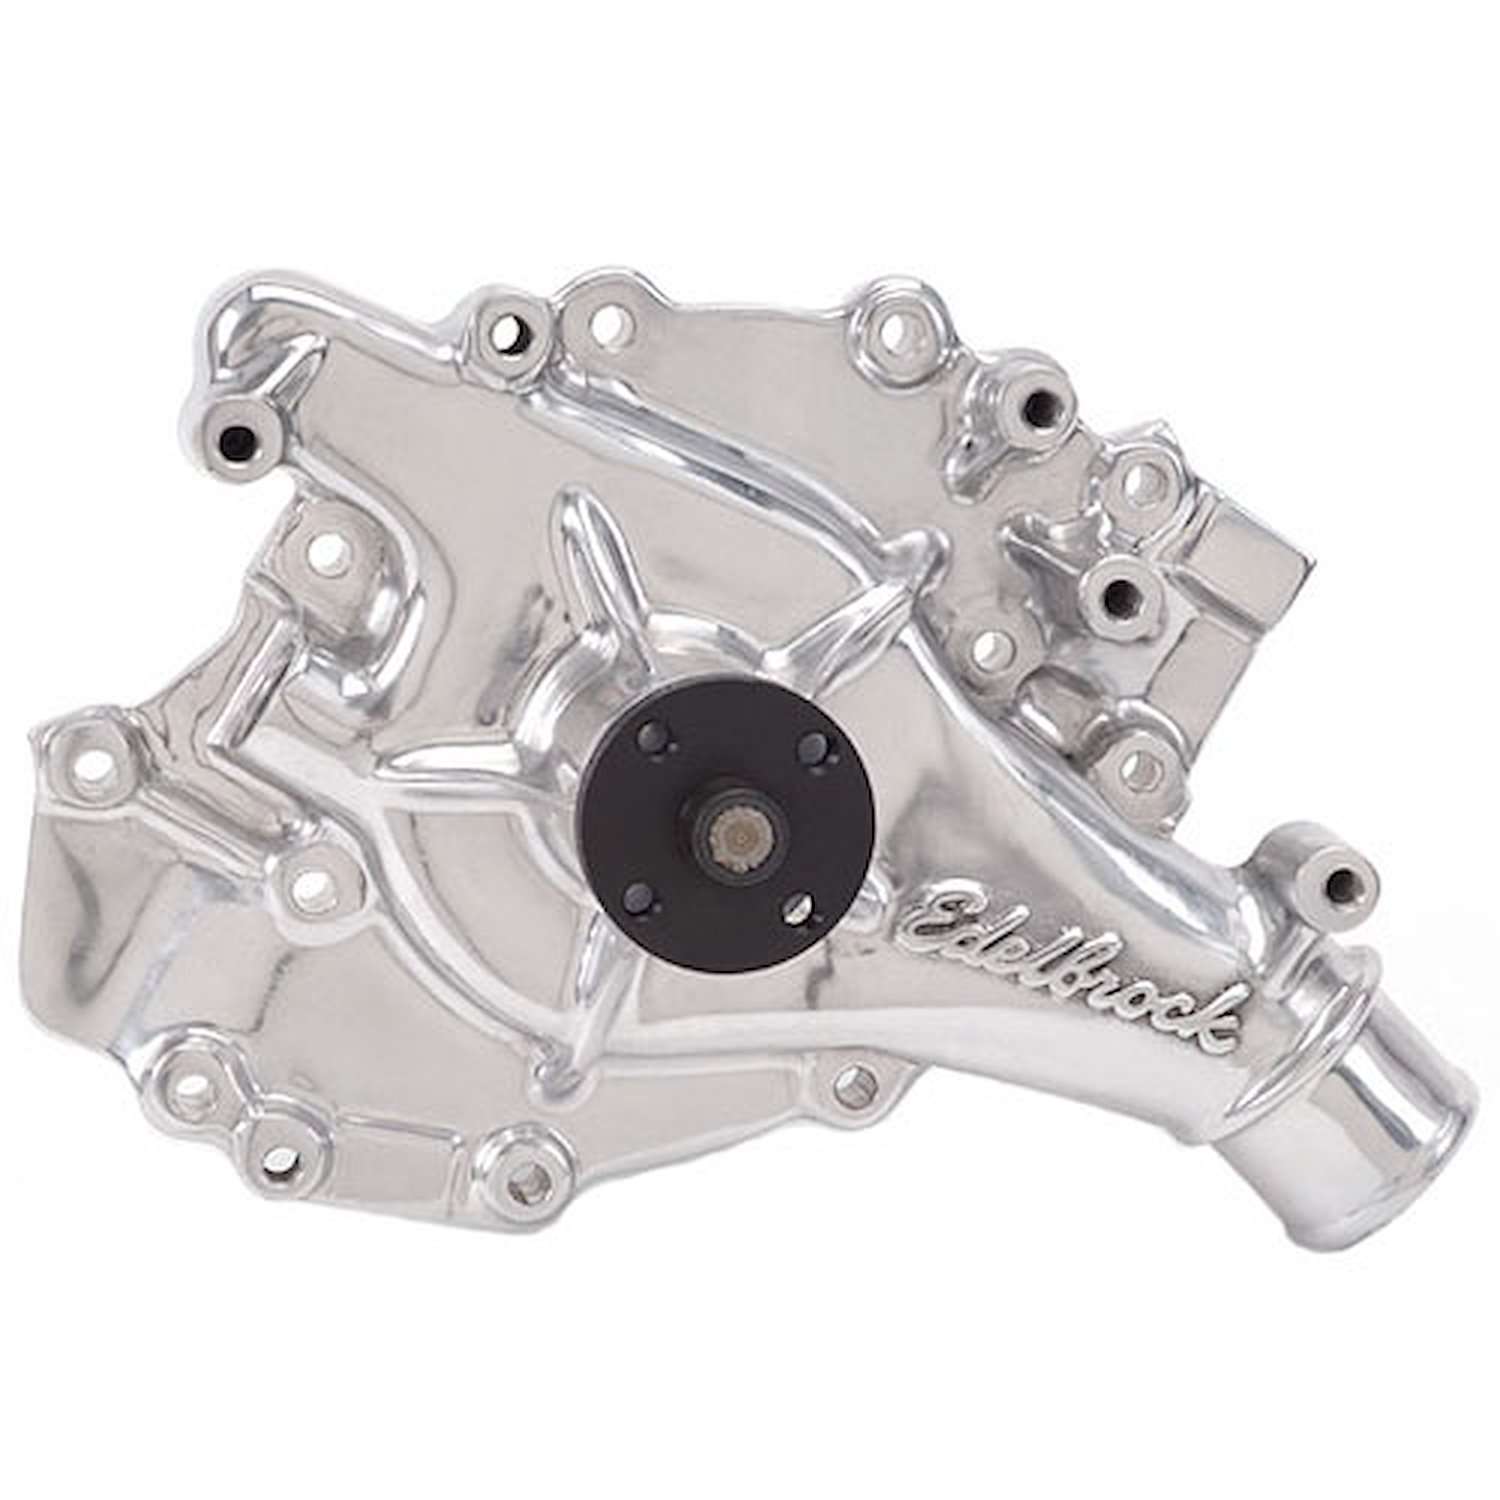 Victor Series Polished Aluminum Water Pump for 1970-1992 Big Block Ford 429/460